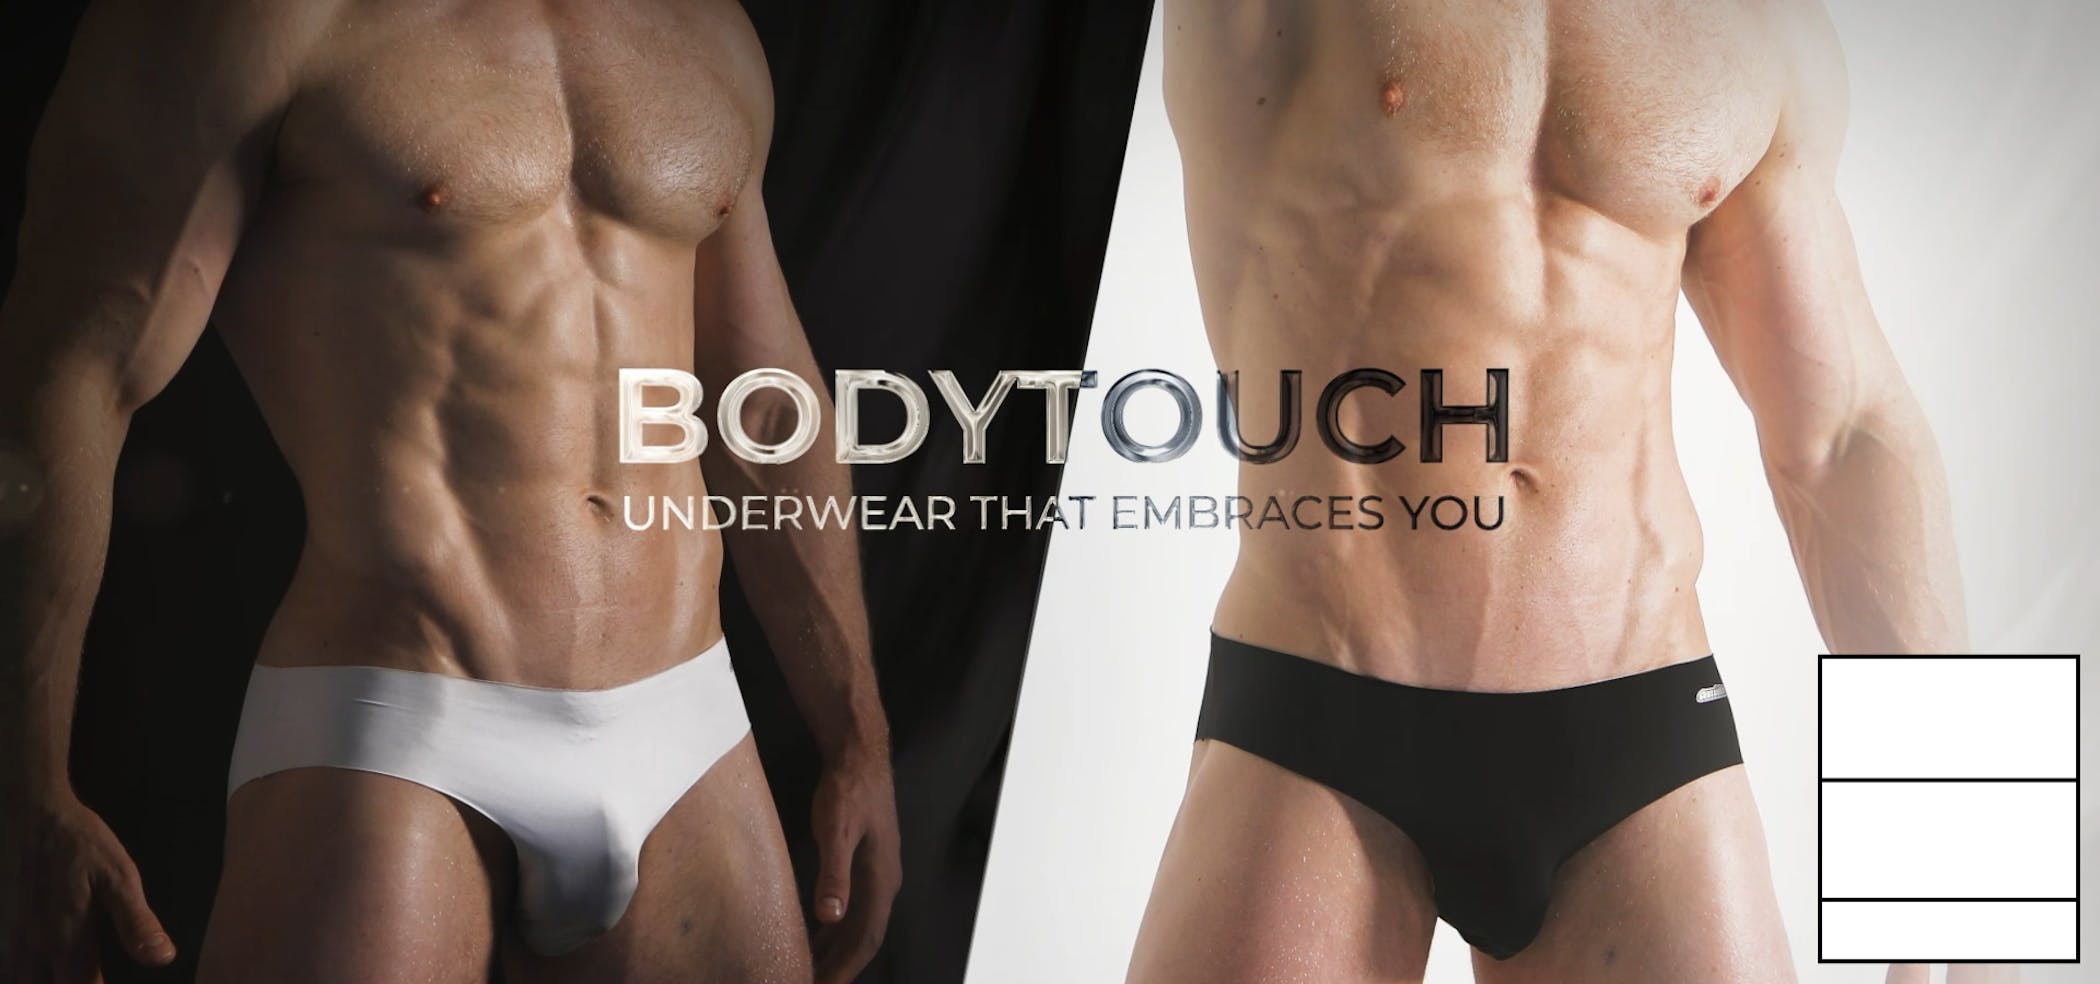 BodyTouch Black Homepage Image